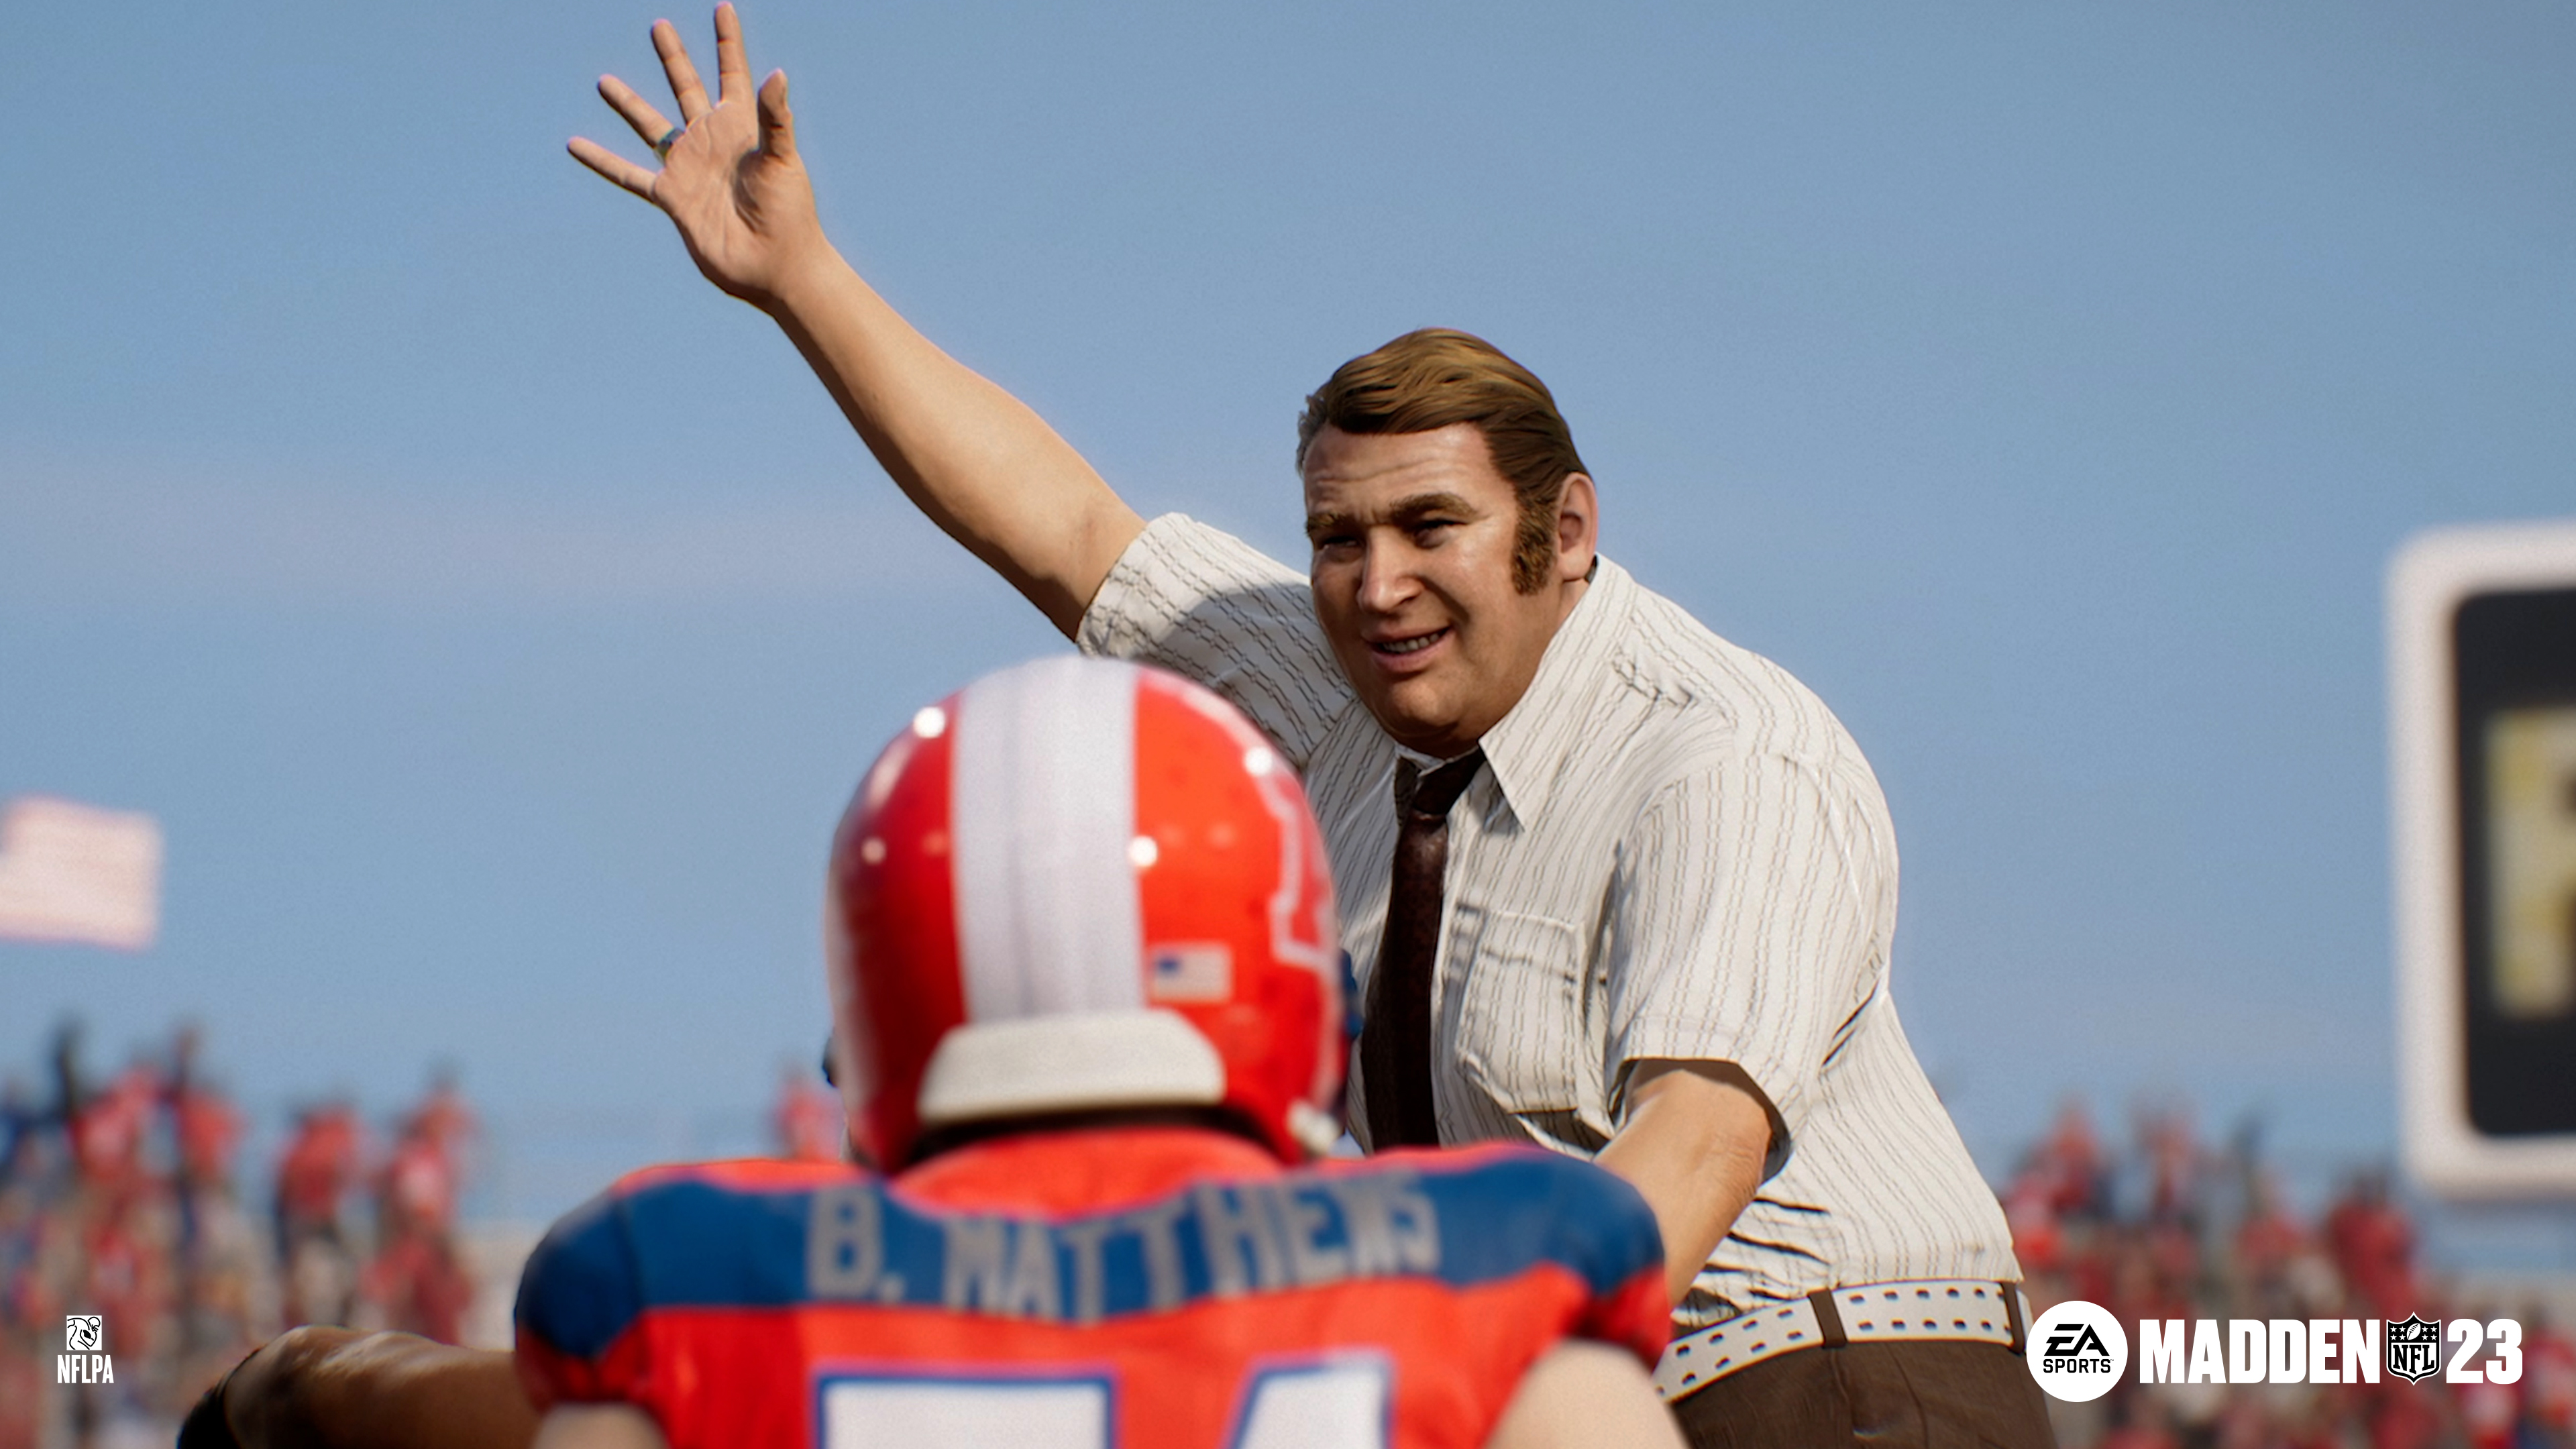 John Madden as he appeared in the late in 1970s is hoisted into the air by his celebrating players in Madden NFL 23